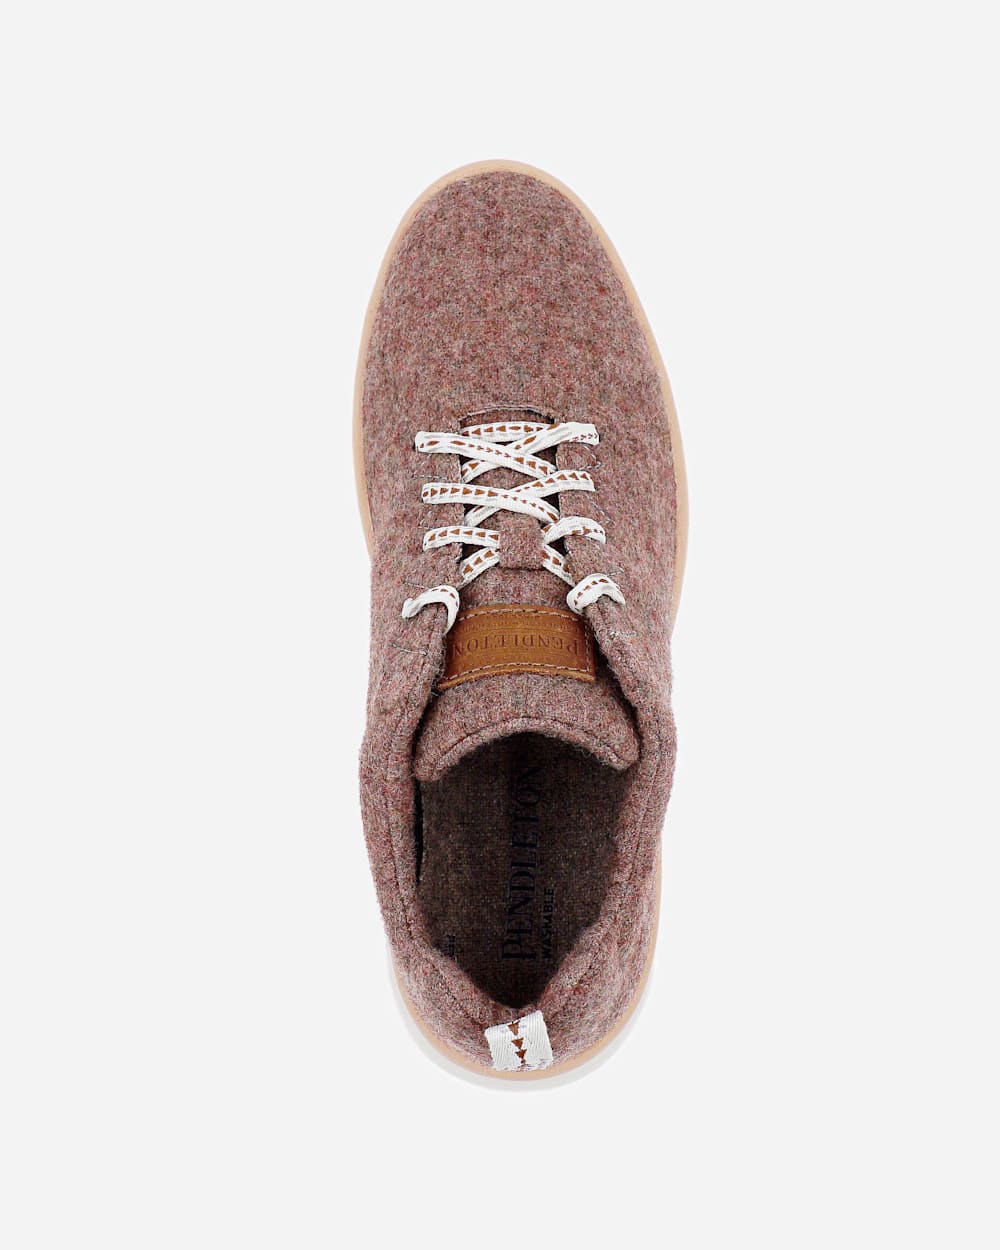 ALTERNATE VIEW OF WOMEN'S PENDLETON WOOL SNEAKERS IN TUSCANY HEATHER image number 3